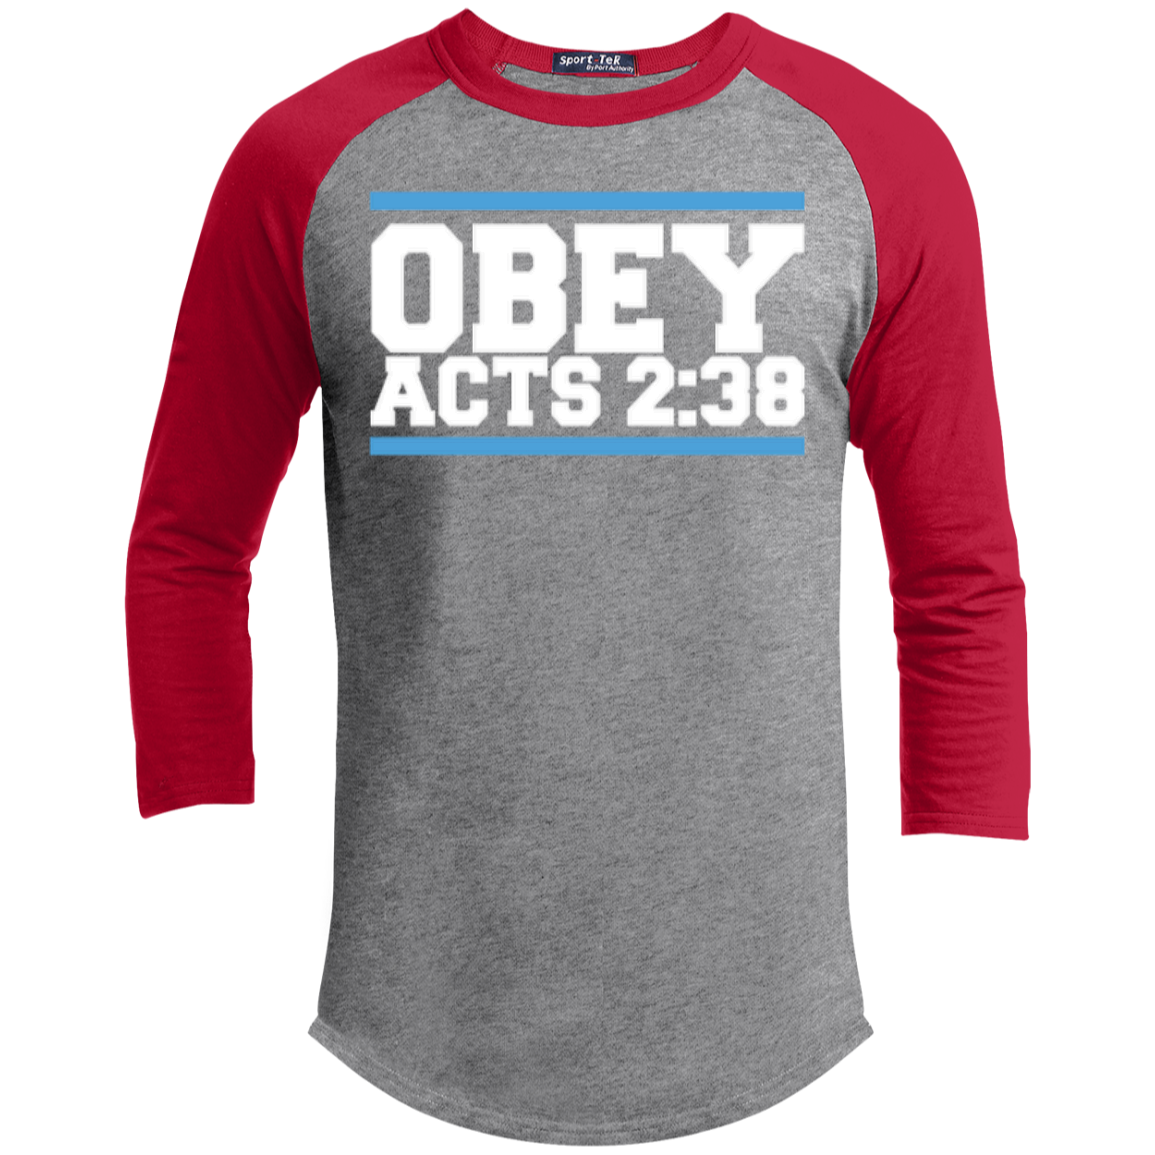 Obey Acts 2:38 - Sporty 3/4 Length Tee Shirt - Kick Merch - 1